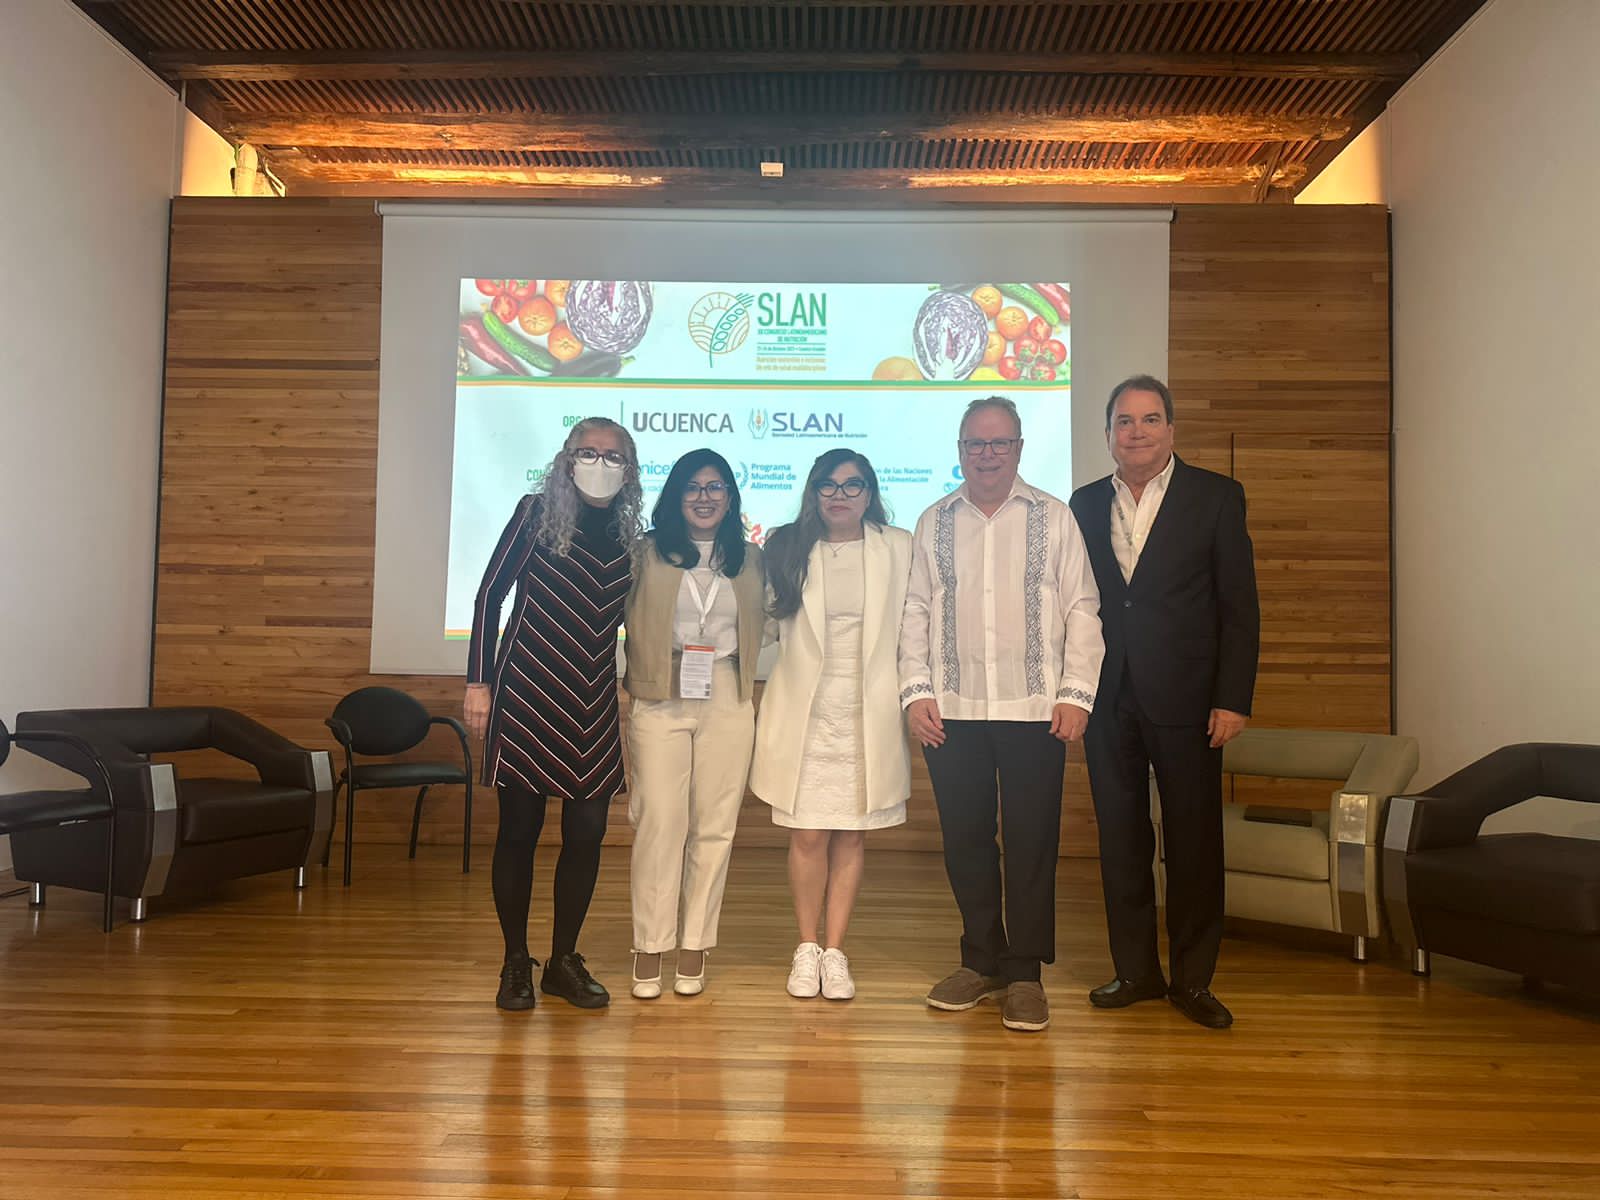 Enrique Ríos Espinosa, MD, DrPh, MPH, attended the Latin-American Society of Nutrition (SLAN: XX Congreso Latinoamericano de Nutrición) 2023 Conference, October 21st-26th in Cuenca, Ecuador. There he moderated a seminar titled: “Suboptimal Complementary Feeding Practices in LATAM: An urgent call to action”. Ivonne Ramirez PhD, National Institute of Public Health (Mexico); Reyna Lira PhD, Research Institute of Nutrition (Peru); Giovanna Gatica PhD (WHO, Geneva); and Rafael Perez-Escamilla PhD (Yale, School of Public Health) participated in the session.